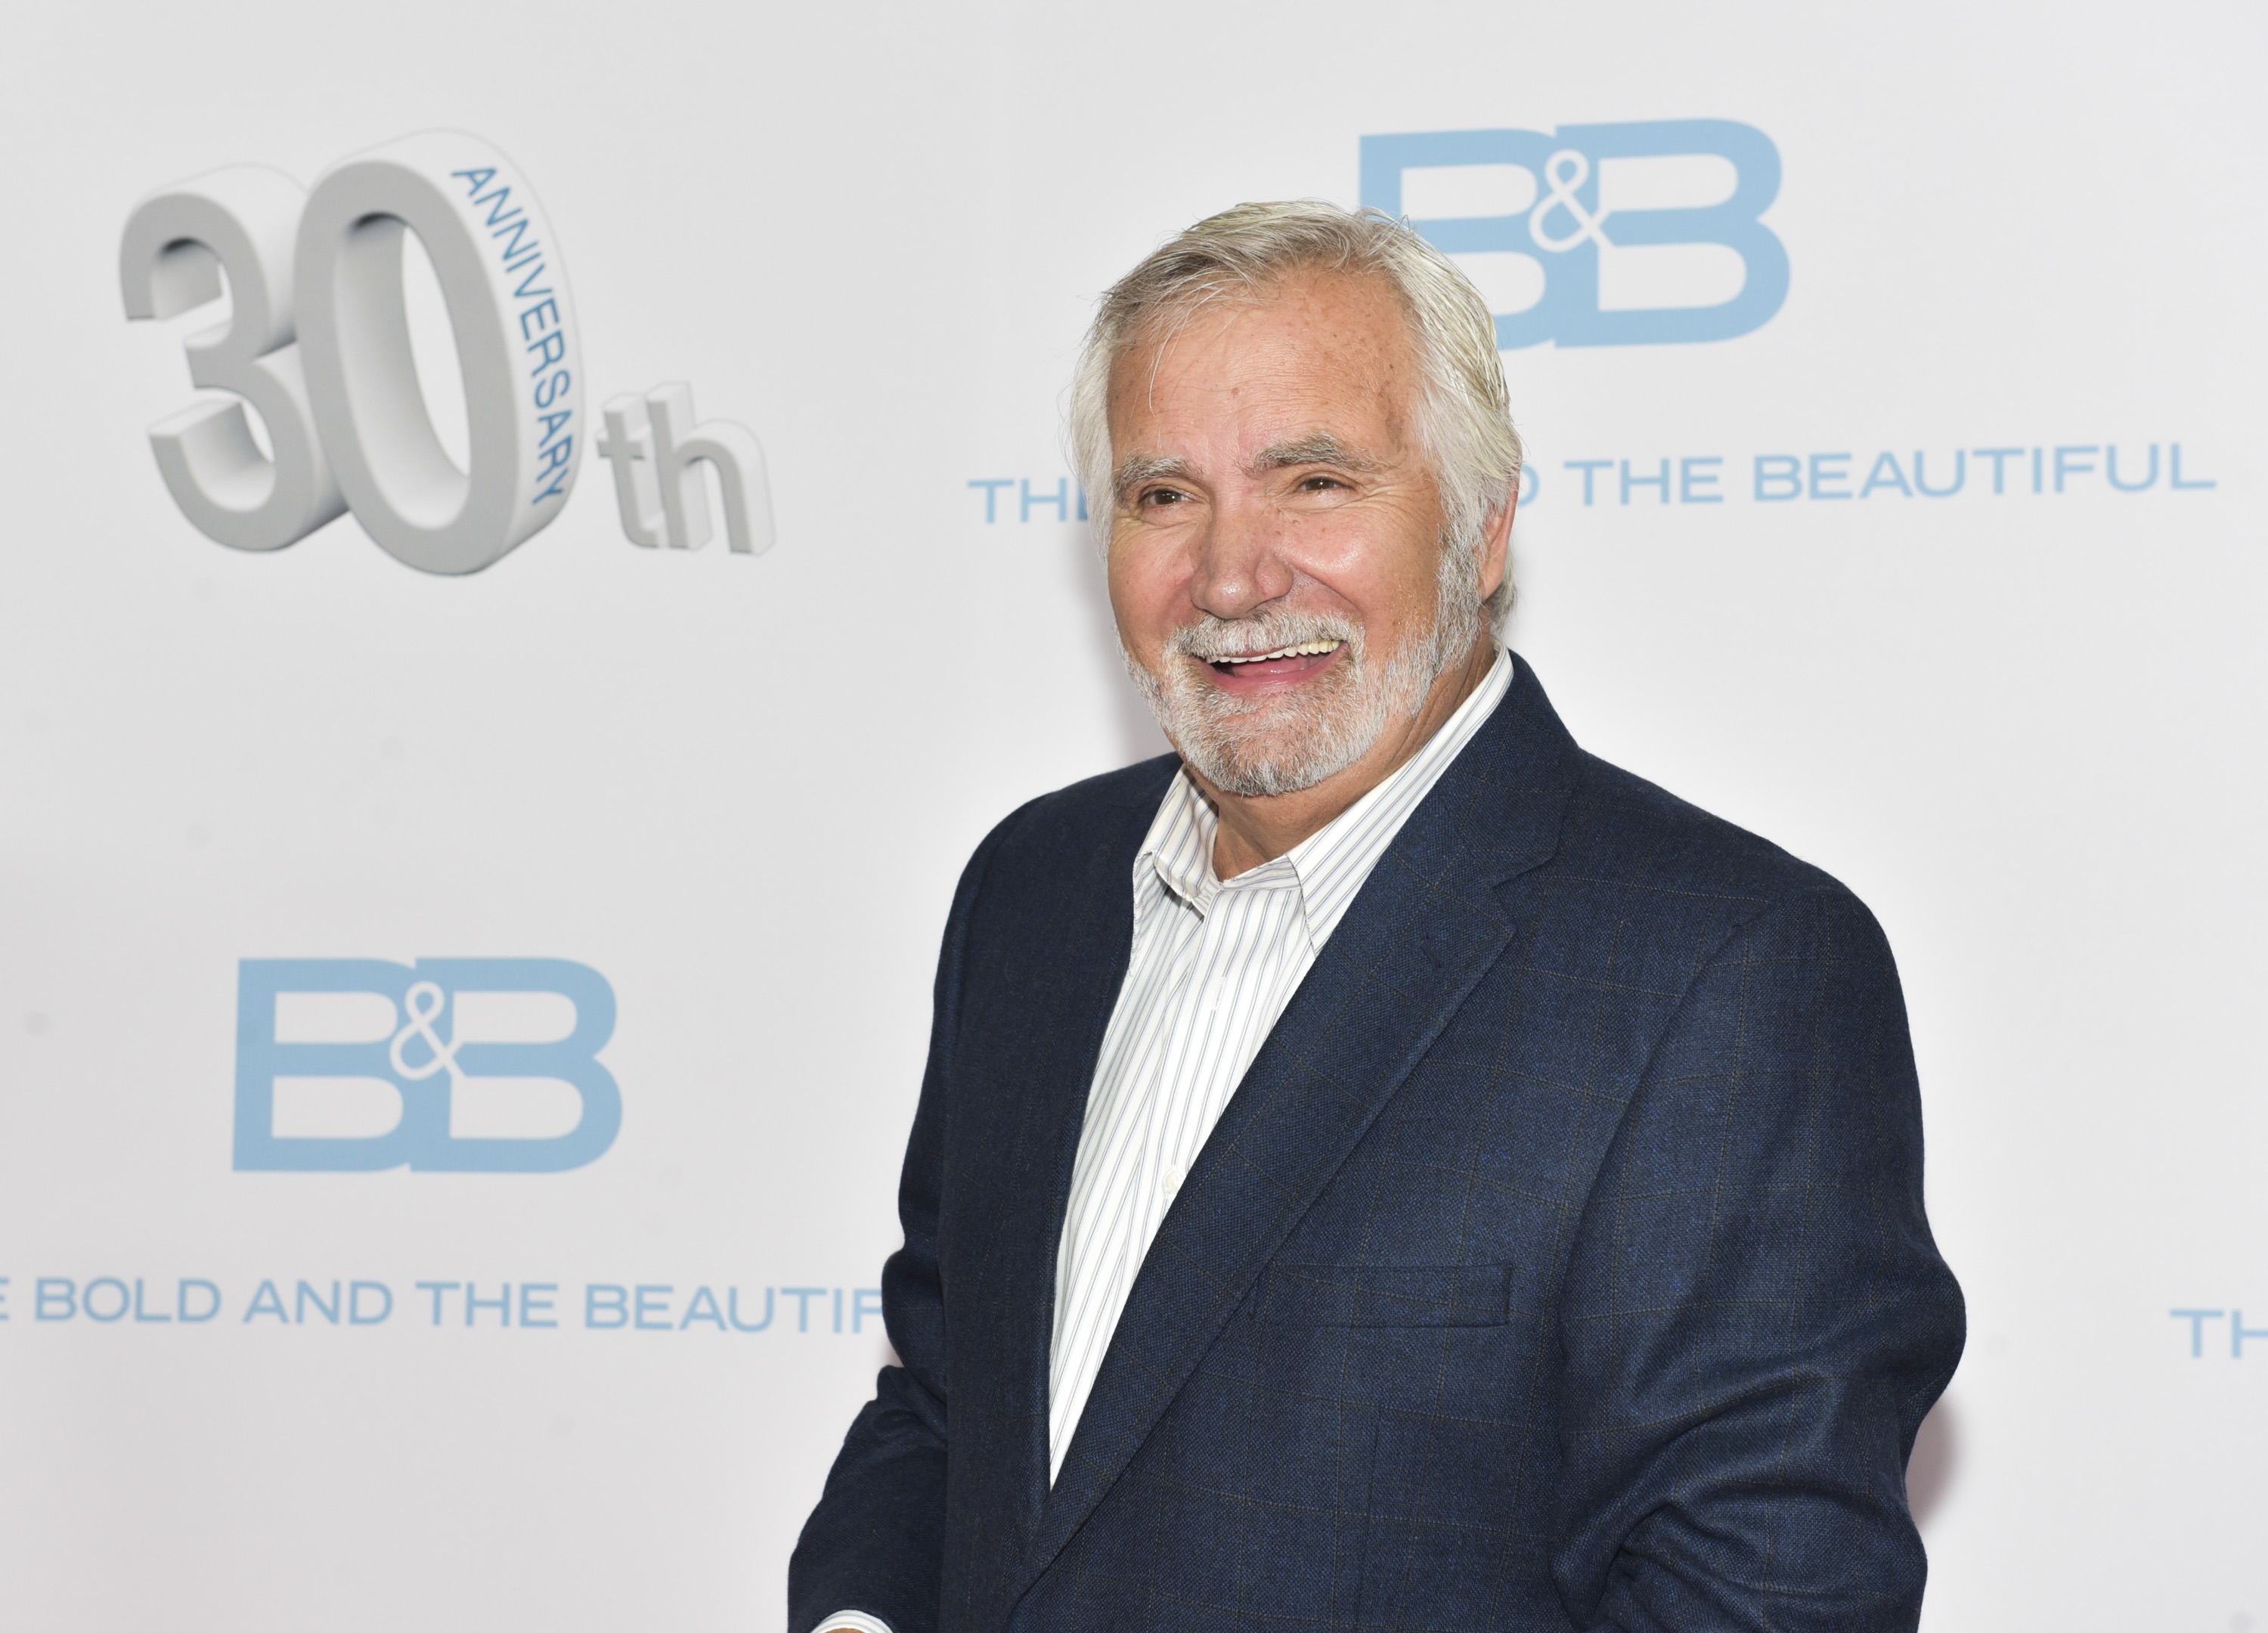 'The Bold and the Beautiful' actor John McCook wearing a blue suit and a white shirt during the show's anniversary party.